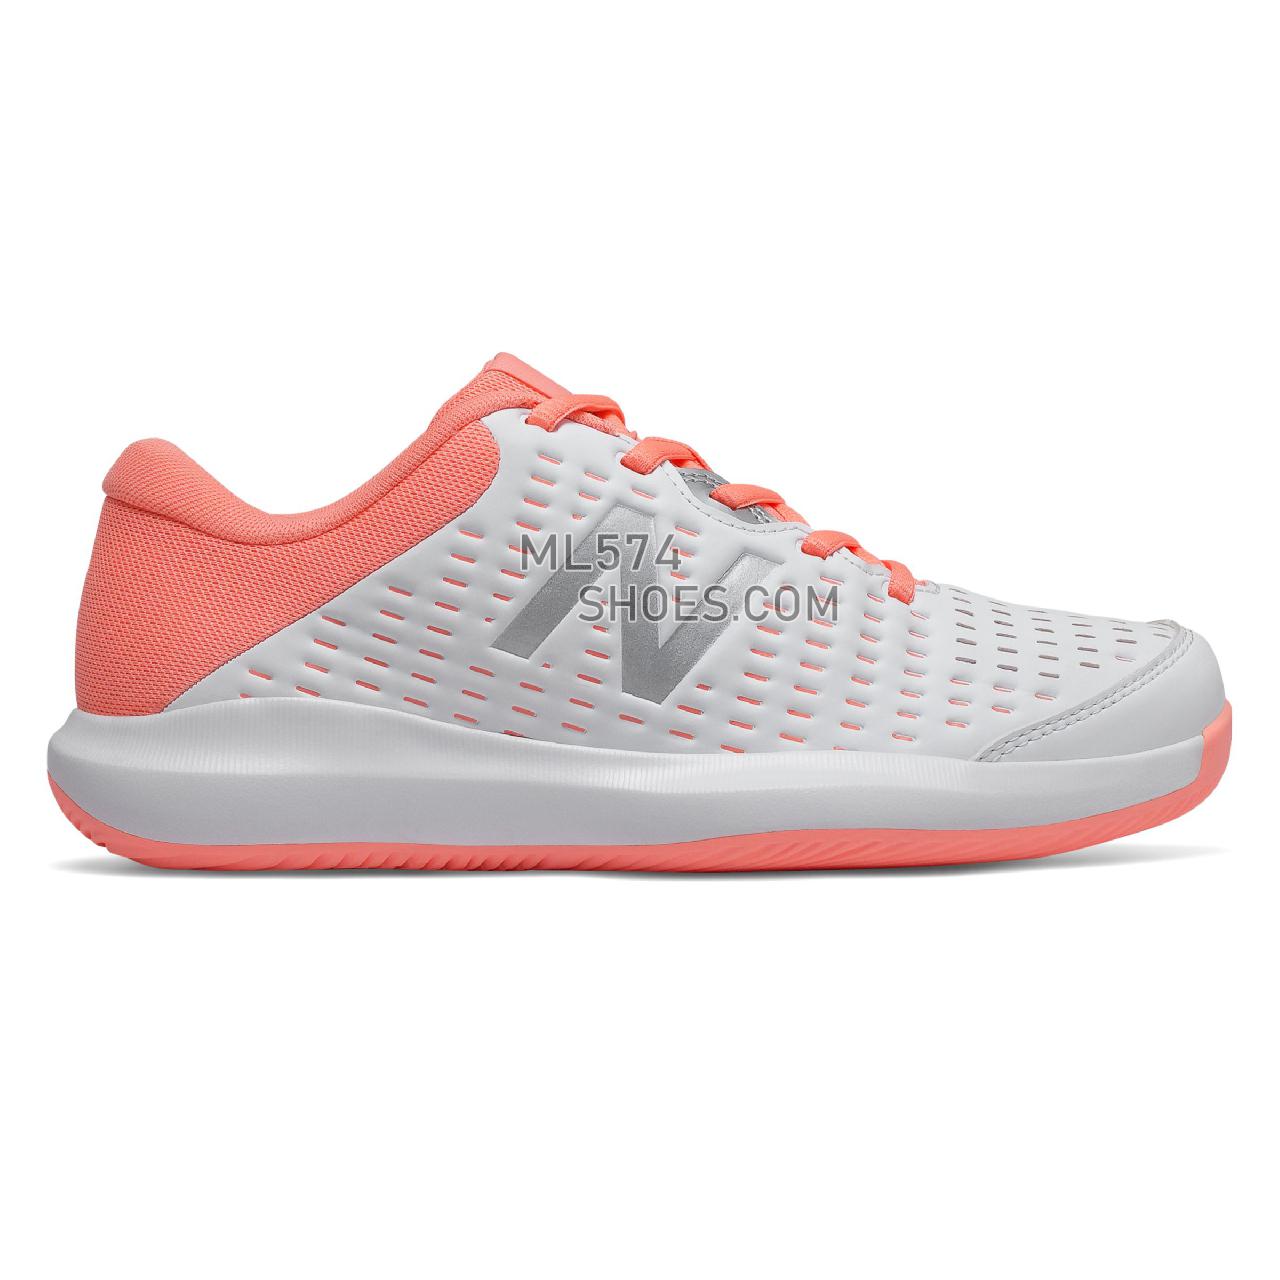 New Balance 696v4 - Women's Tennis - White with Ginger Pink and Silver - WCH696P4